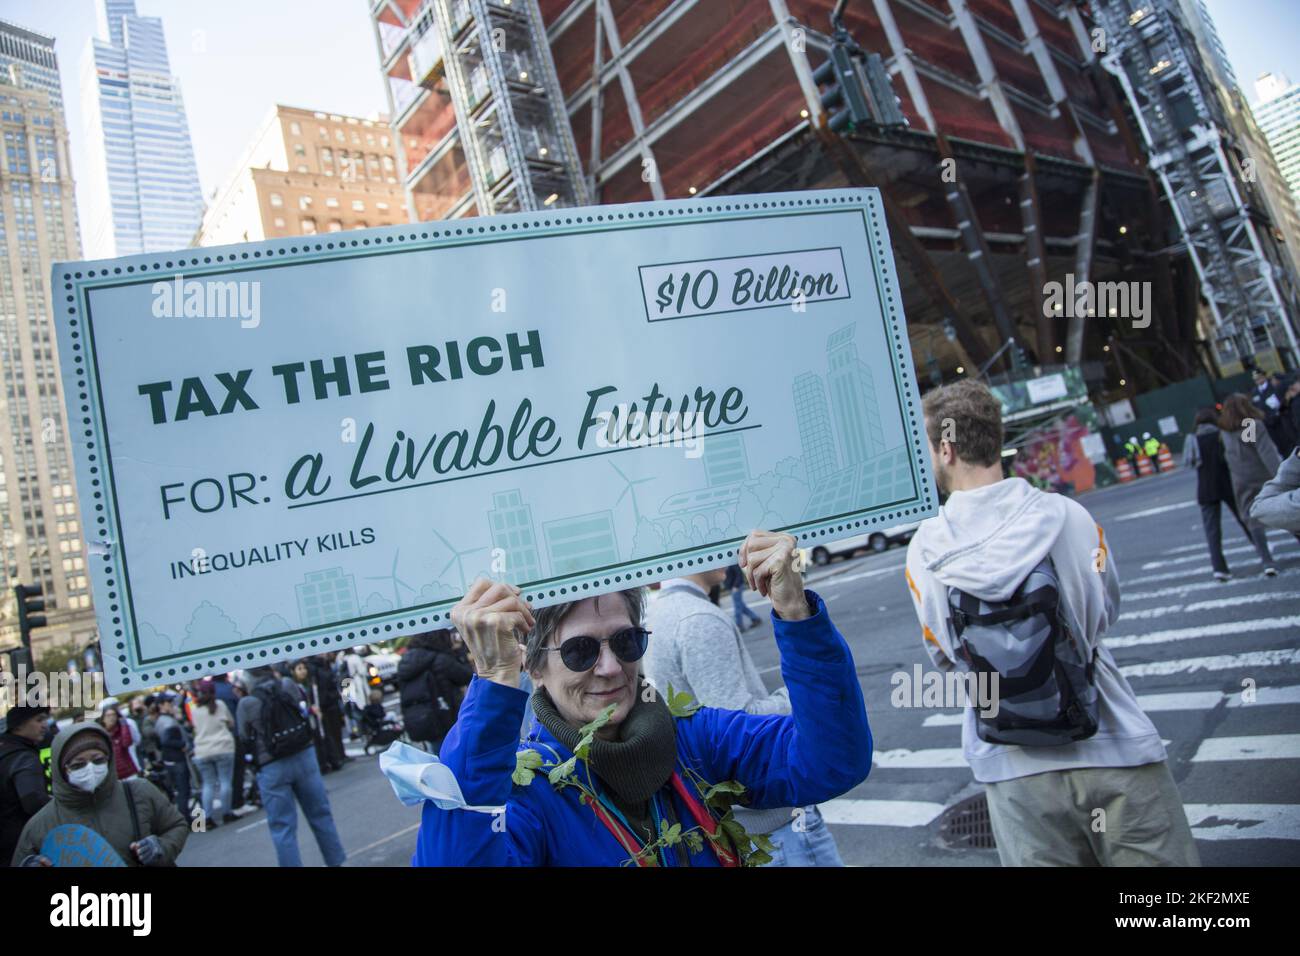 Extinction Rebellion and other groups march along Park Avenue stopping at J.P.Morgan Chase, Black Rock and other huge investment firms telling them to stop investing in fossil fuels and replace greed with care for the future of humanity and stop the growing climate catastrophe. Stock Photo